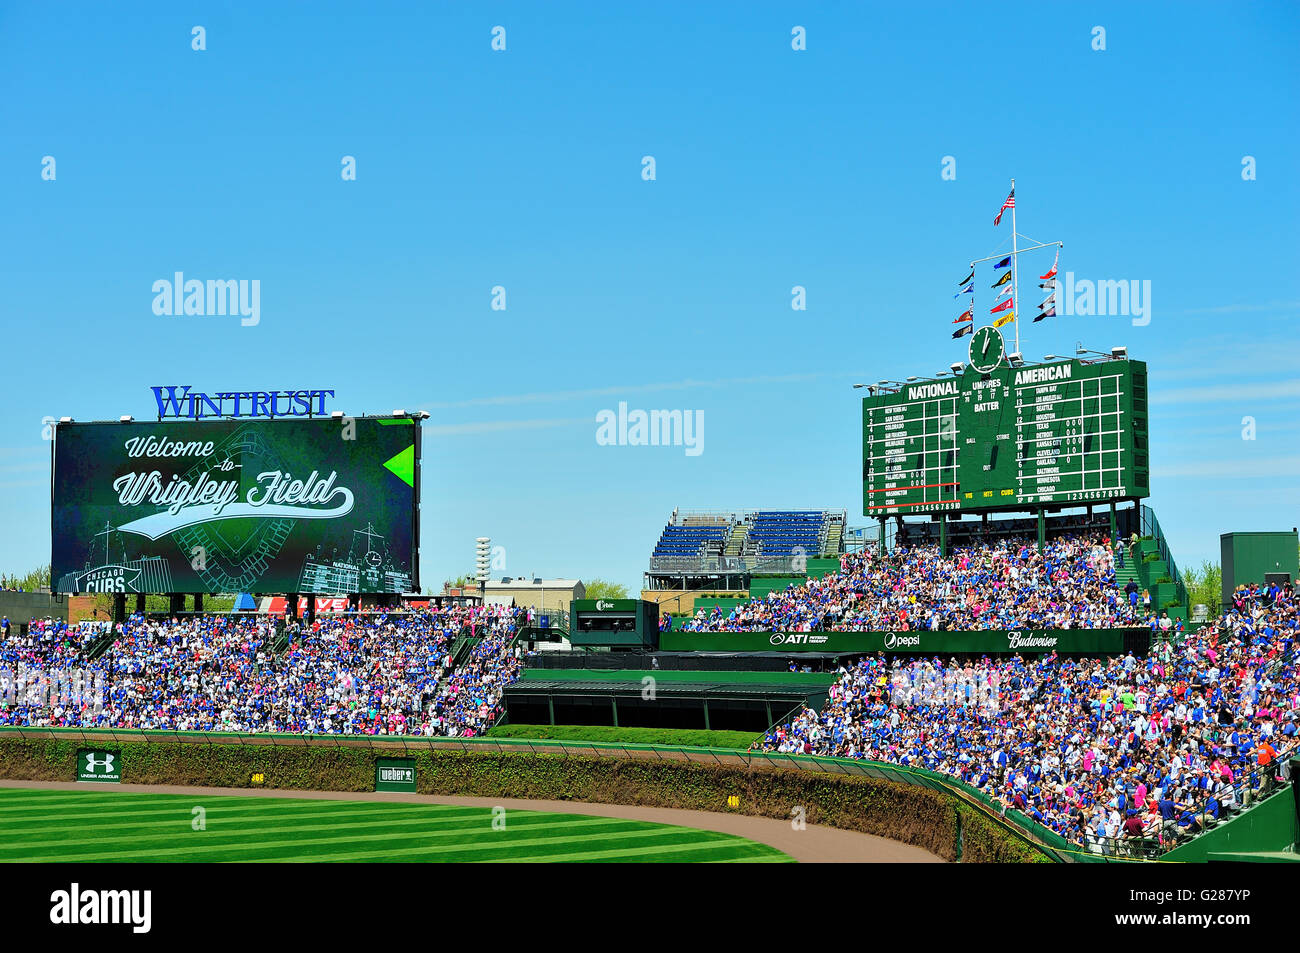 A study in contrasts at Chicago's Wrigley Field, home of the Chicago Cubs, is evident above the venerable bleacher seats. Chicago, Illinois, USA. Stock Photo